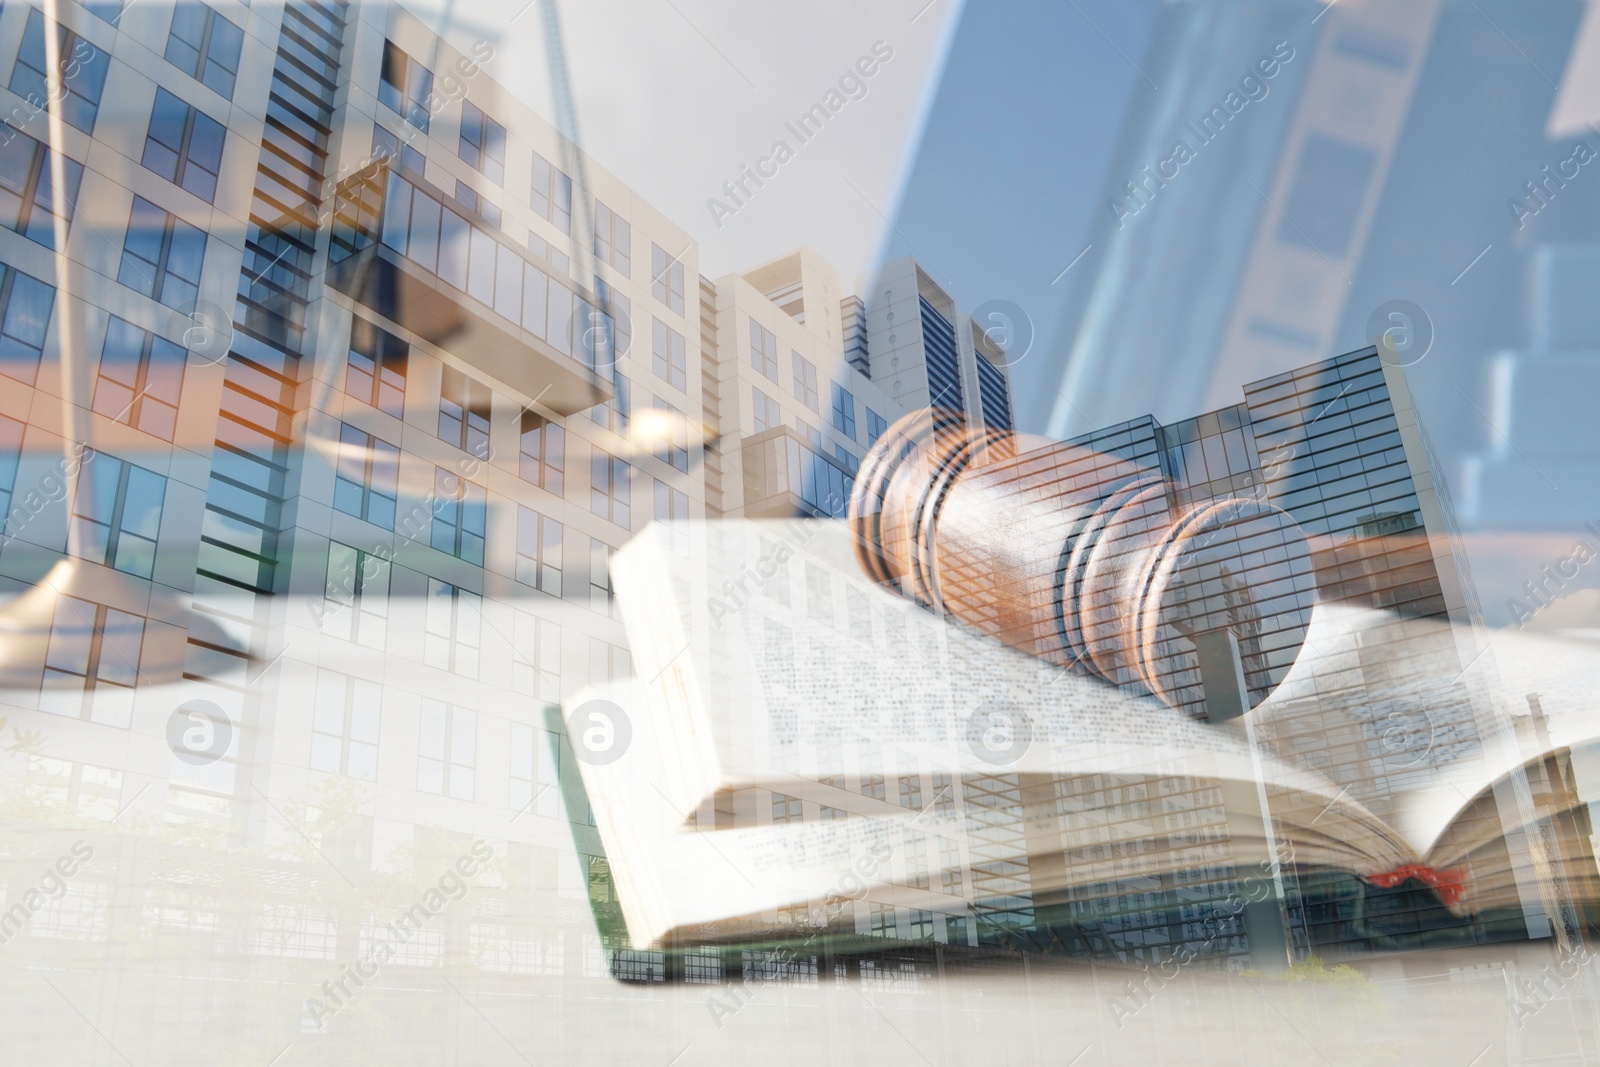 Image of Law protection. Double exposure of book with wooden gavel and buildings